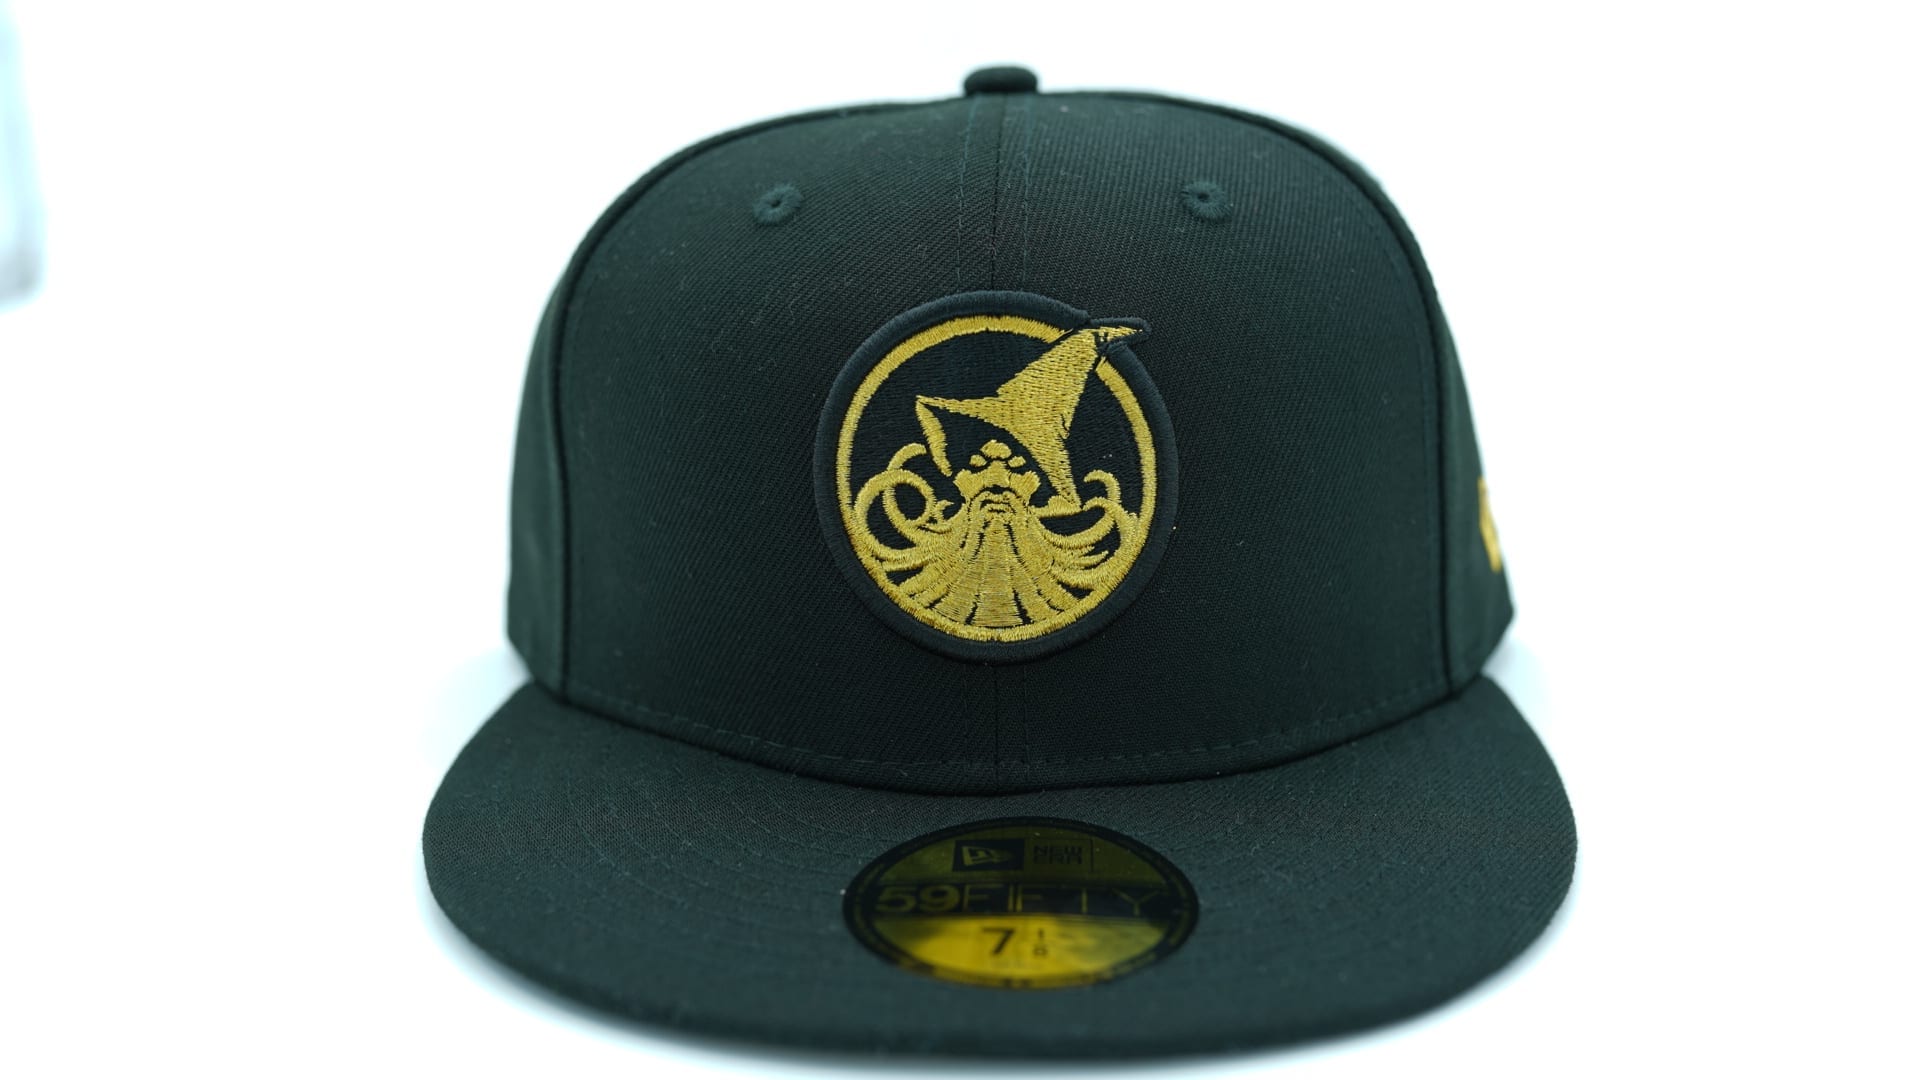 The cap features a baseball inspired Fatlace logo on the front panel and has